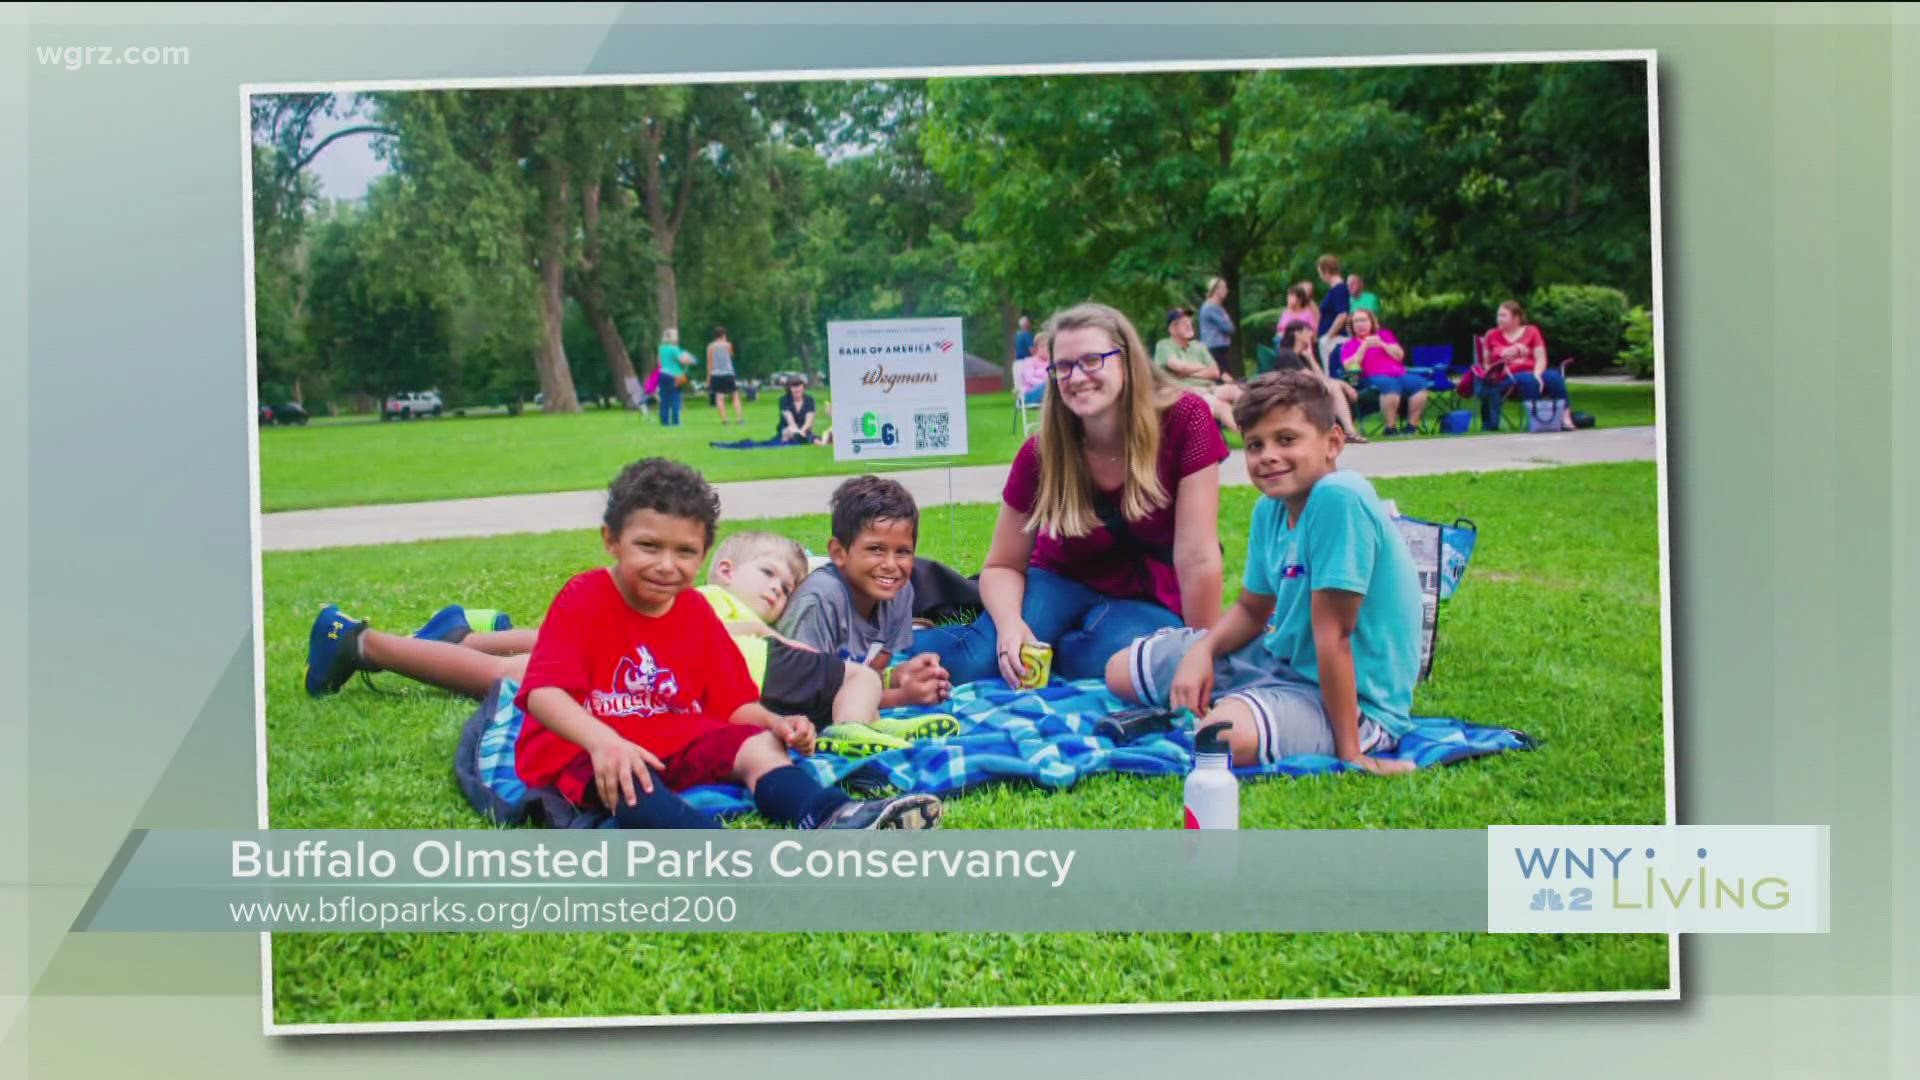 WNY Living - June 18 - Buffalo Olmsted Parks Conservancy (THIS VIDEO IS SPONSORED BY BUFFALO OLMSTED PARKS CONSERVANCY)